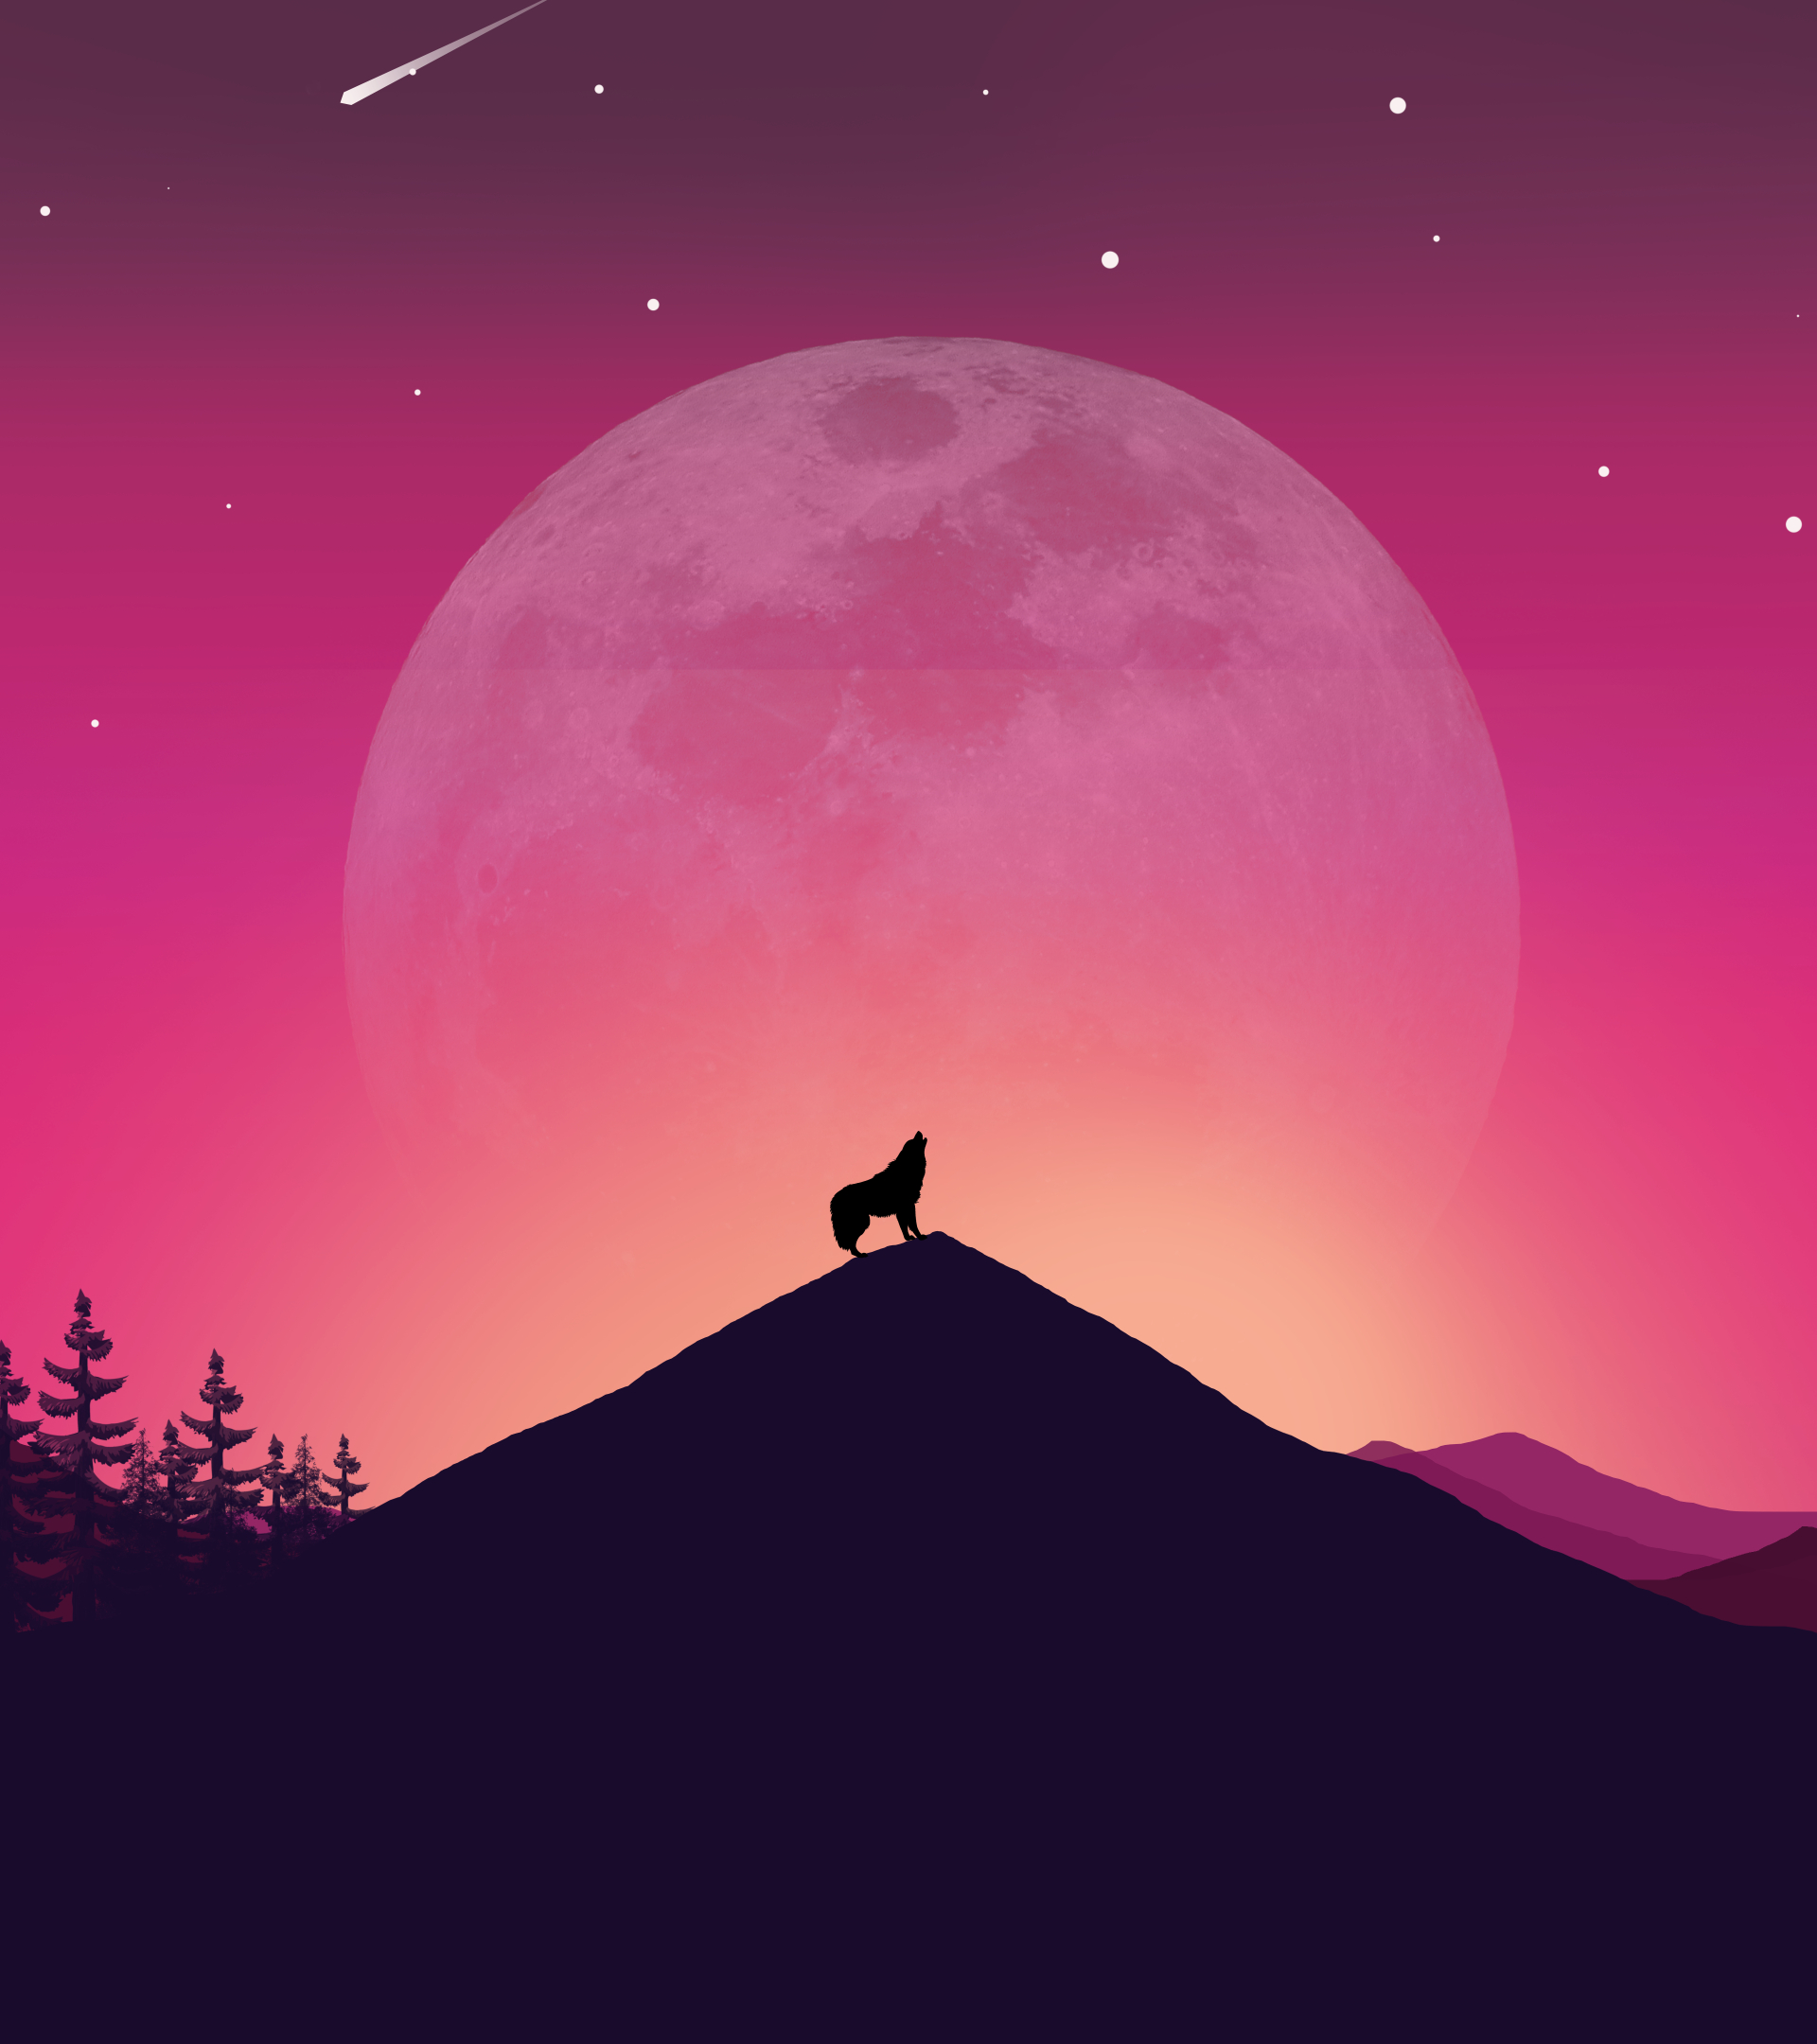 1920x2160 Resolution Wolf and Landscape Illustration 1920x2160 ...